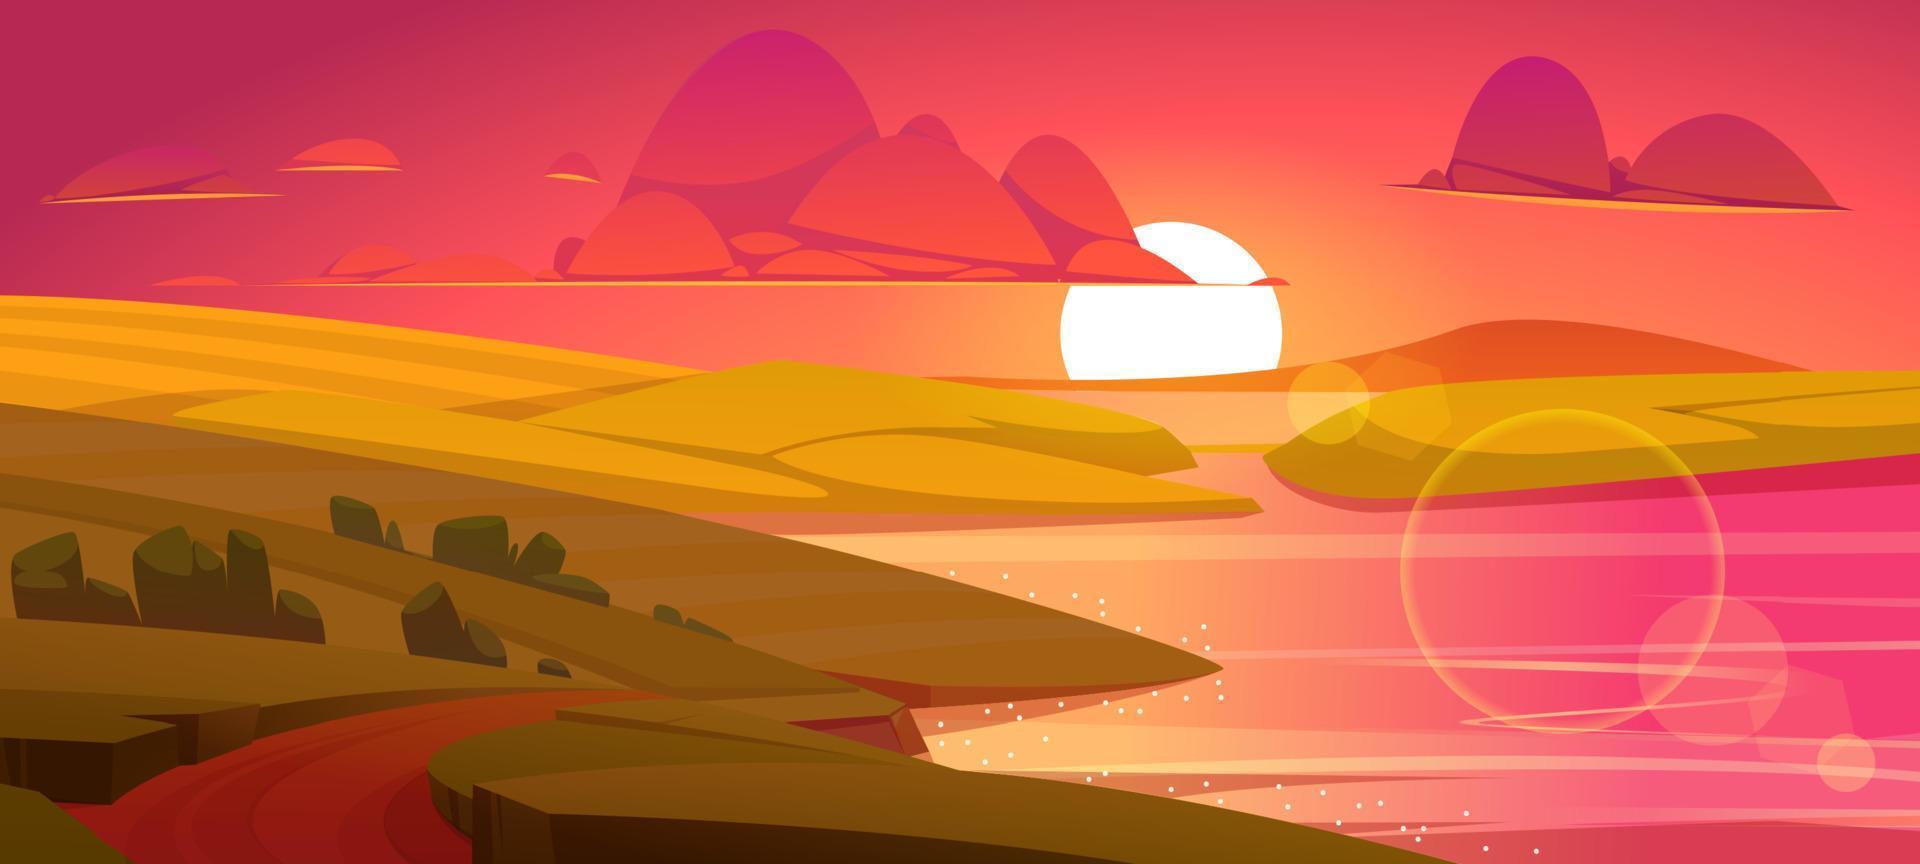 Summer landscape with river and fields at sunset vector